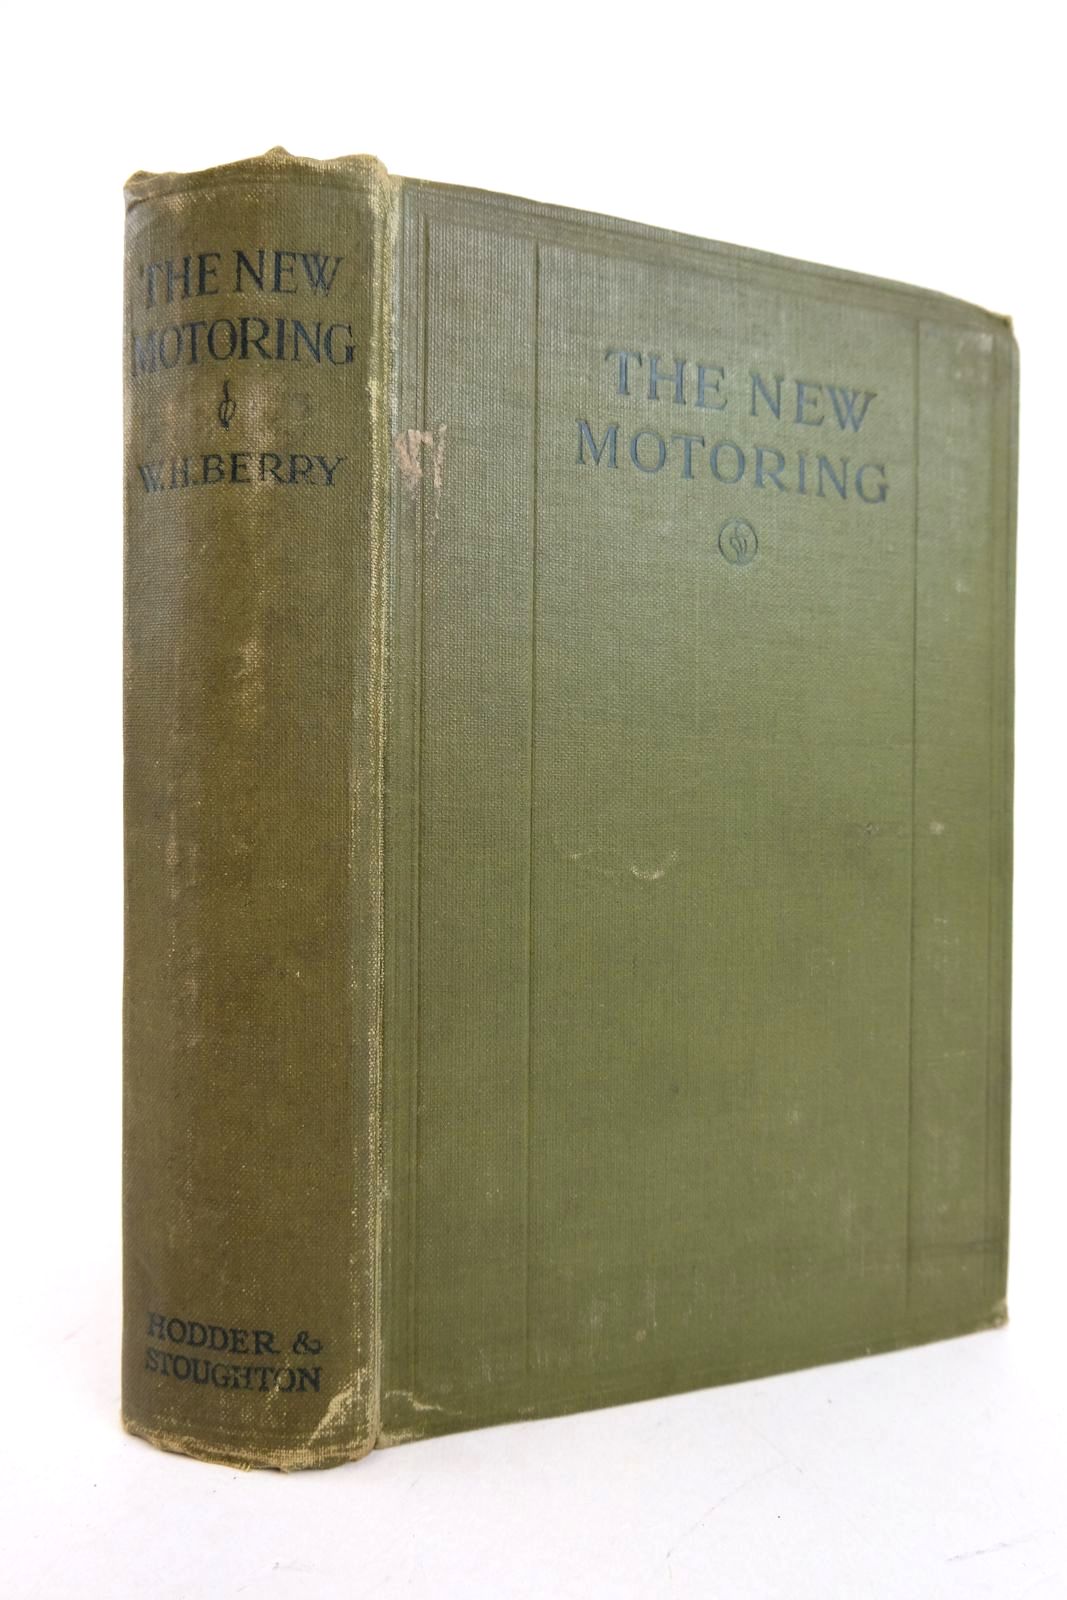 Photo of THE NEW MOTORING written by Berry, W.H. published by Hodder &amp; Stoughton (STOCK CODE: 2133270)  for sale by Stella & Rose's Books